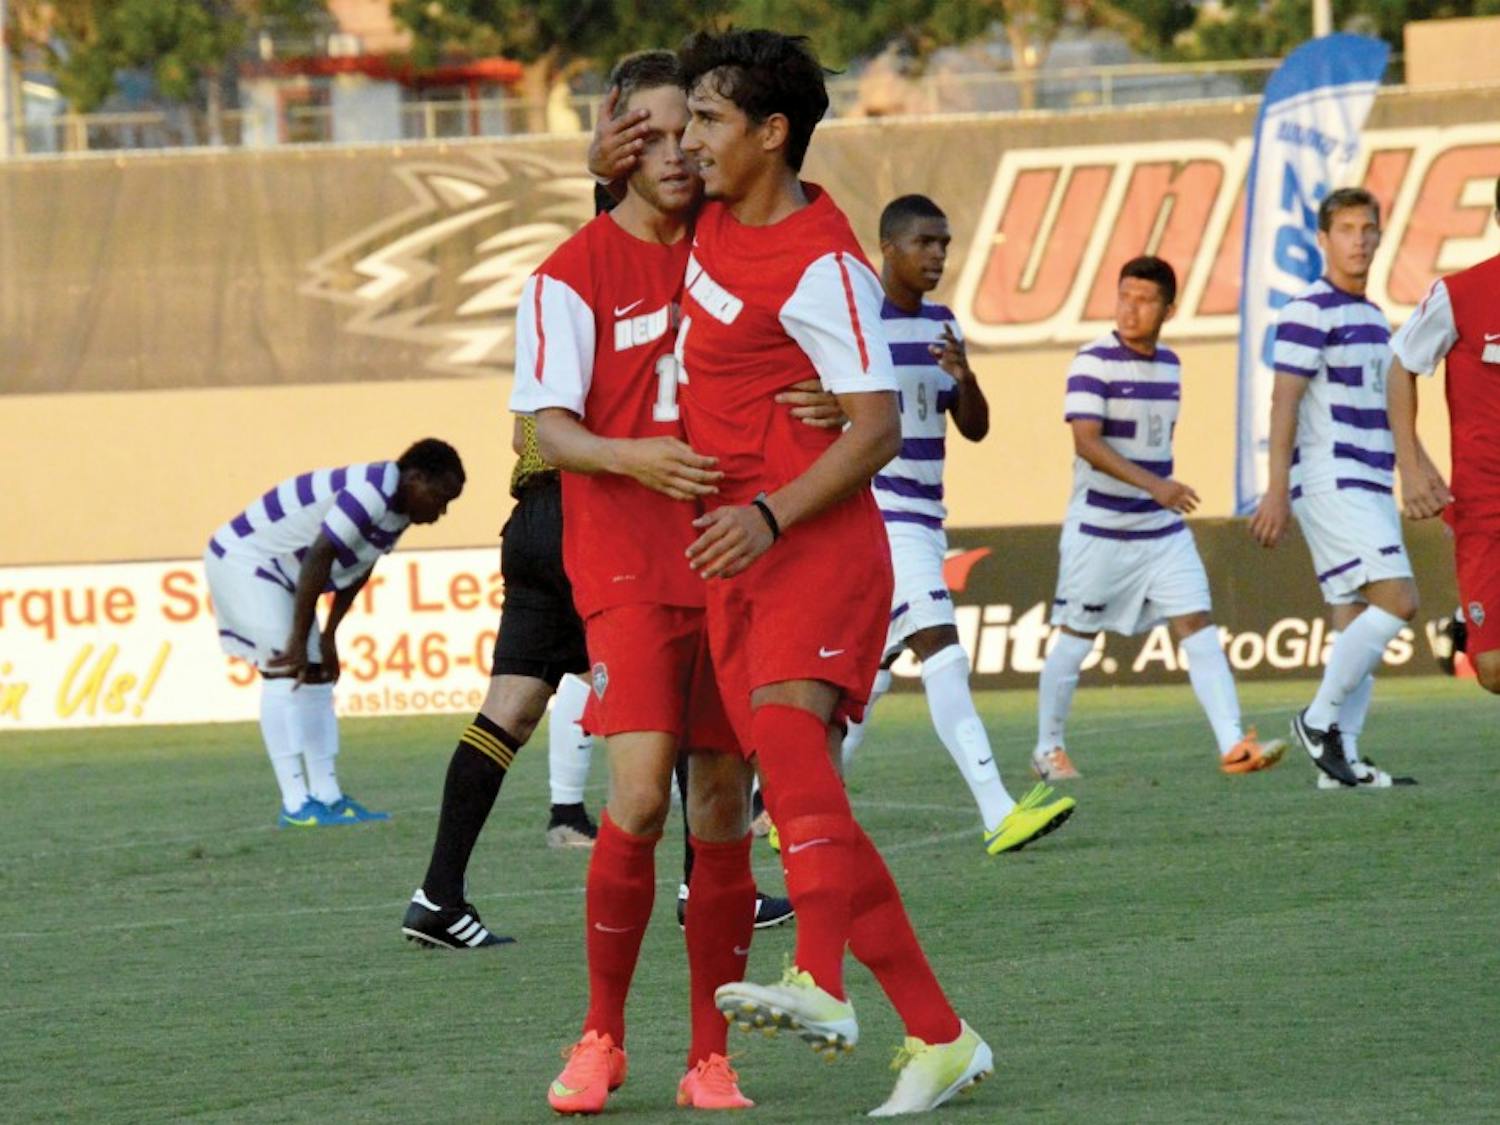 Chris Wehan and Francesco Cassuci congratulate each other during an exhibition game against Grand Canyon University on Aug. 19. The Lobos play at top-ranked UCLA this Saturday for the season opener.